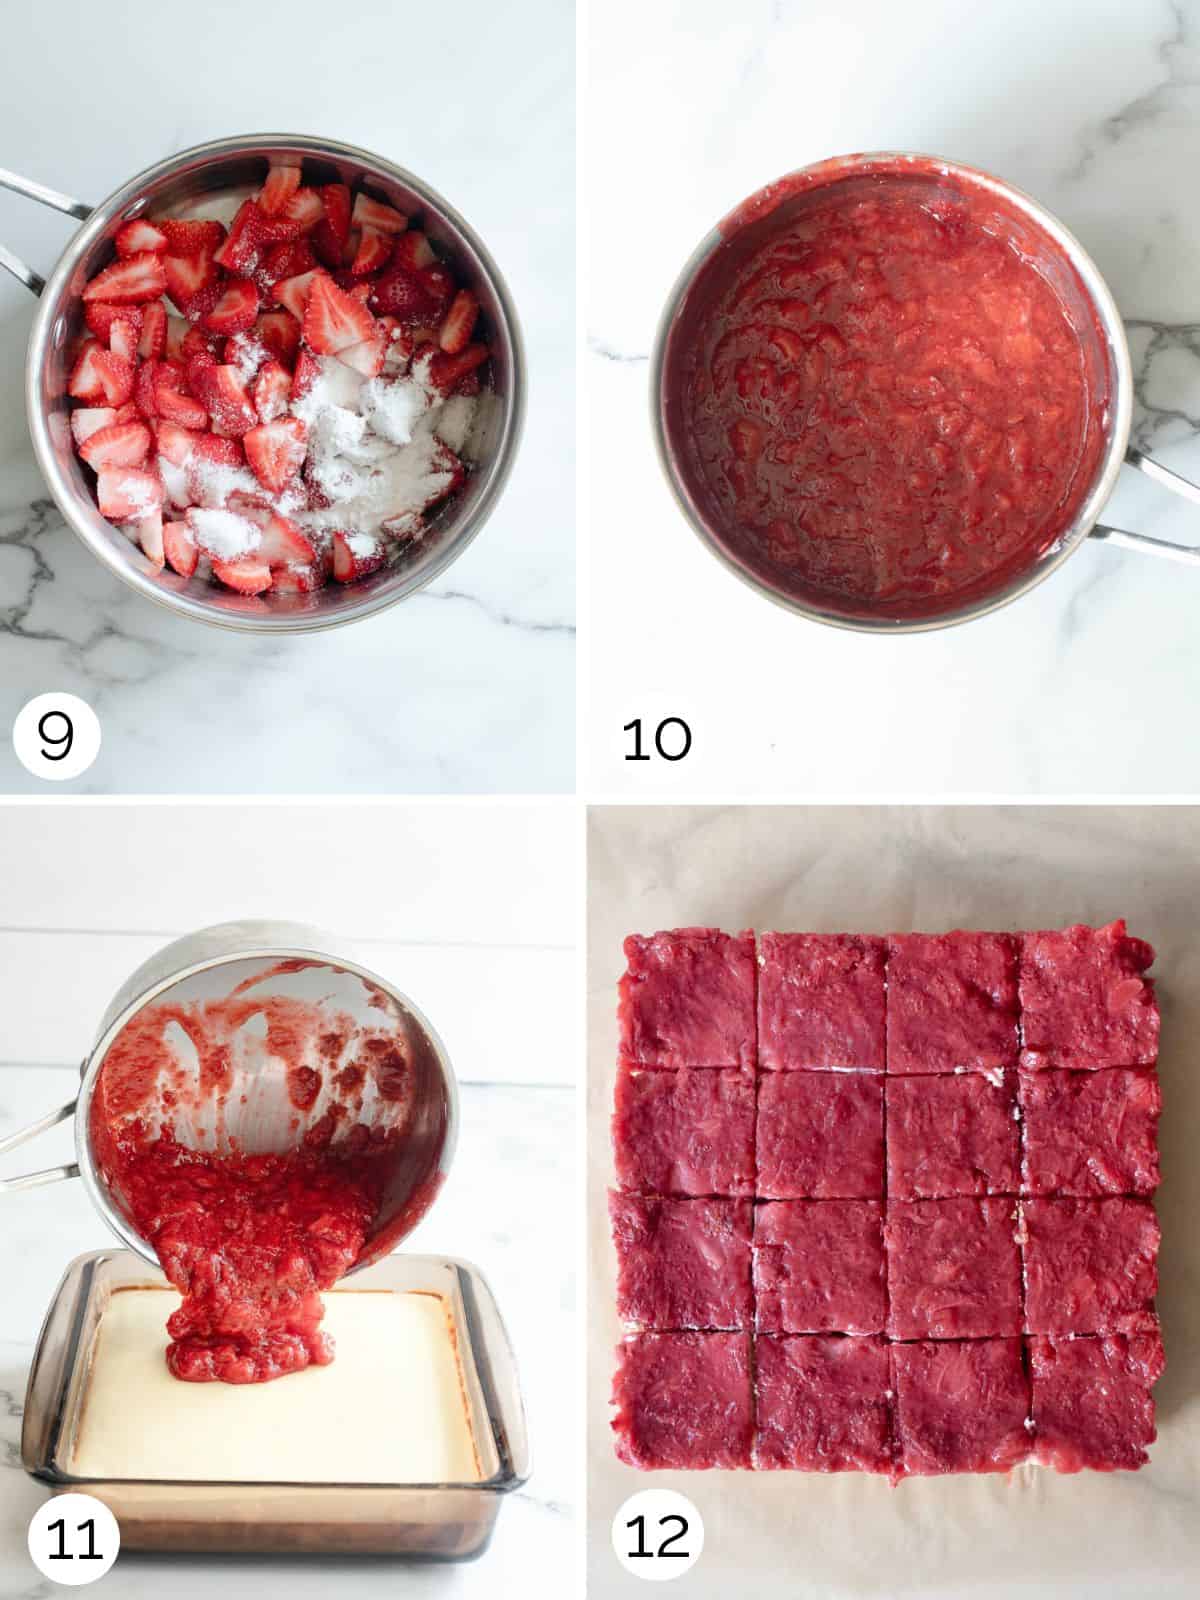 Step process for reducing fresh strawberries to make a strawberry topping and then pouring on top of the cheesecake bars.